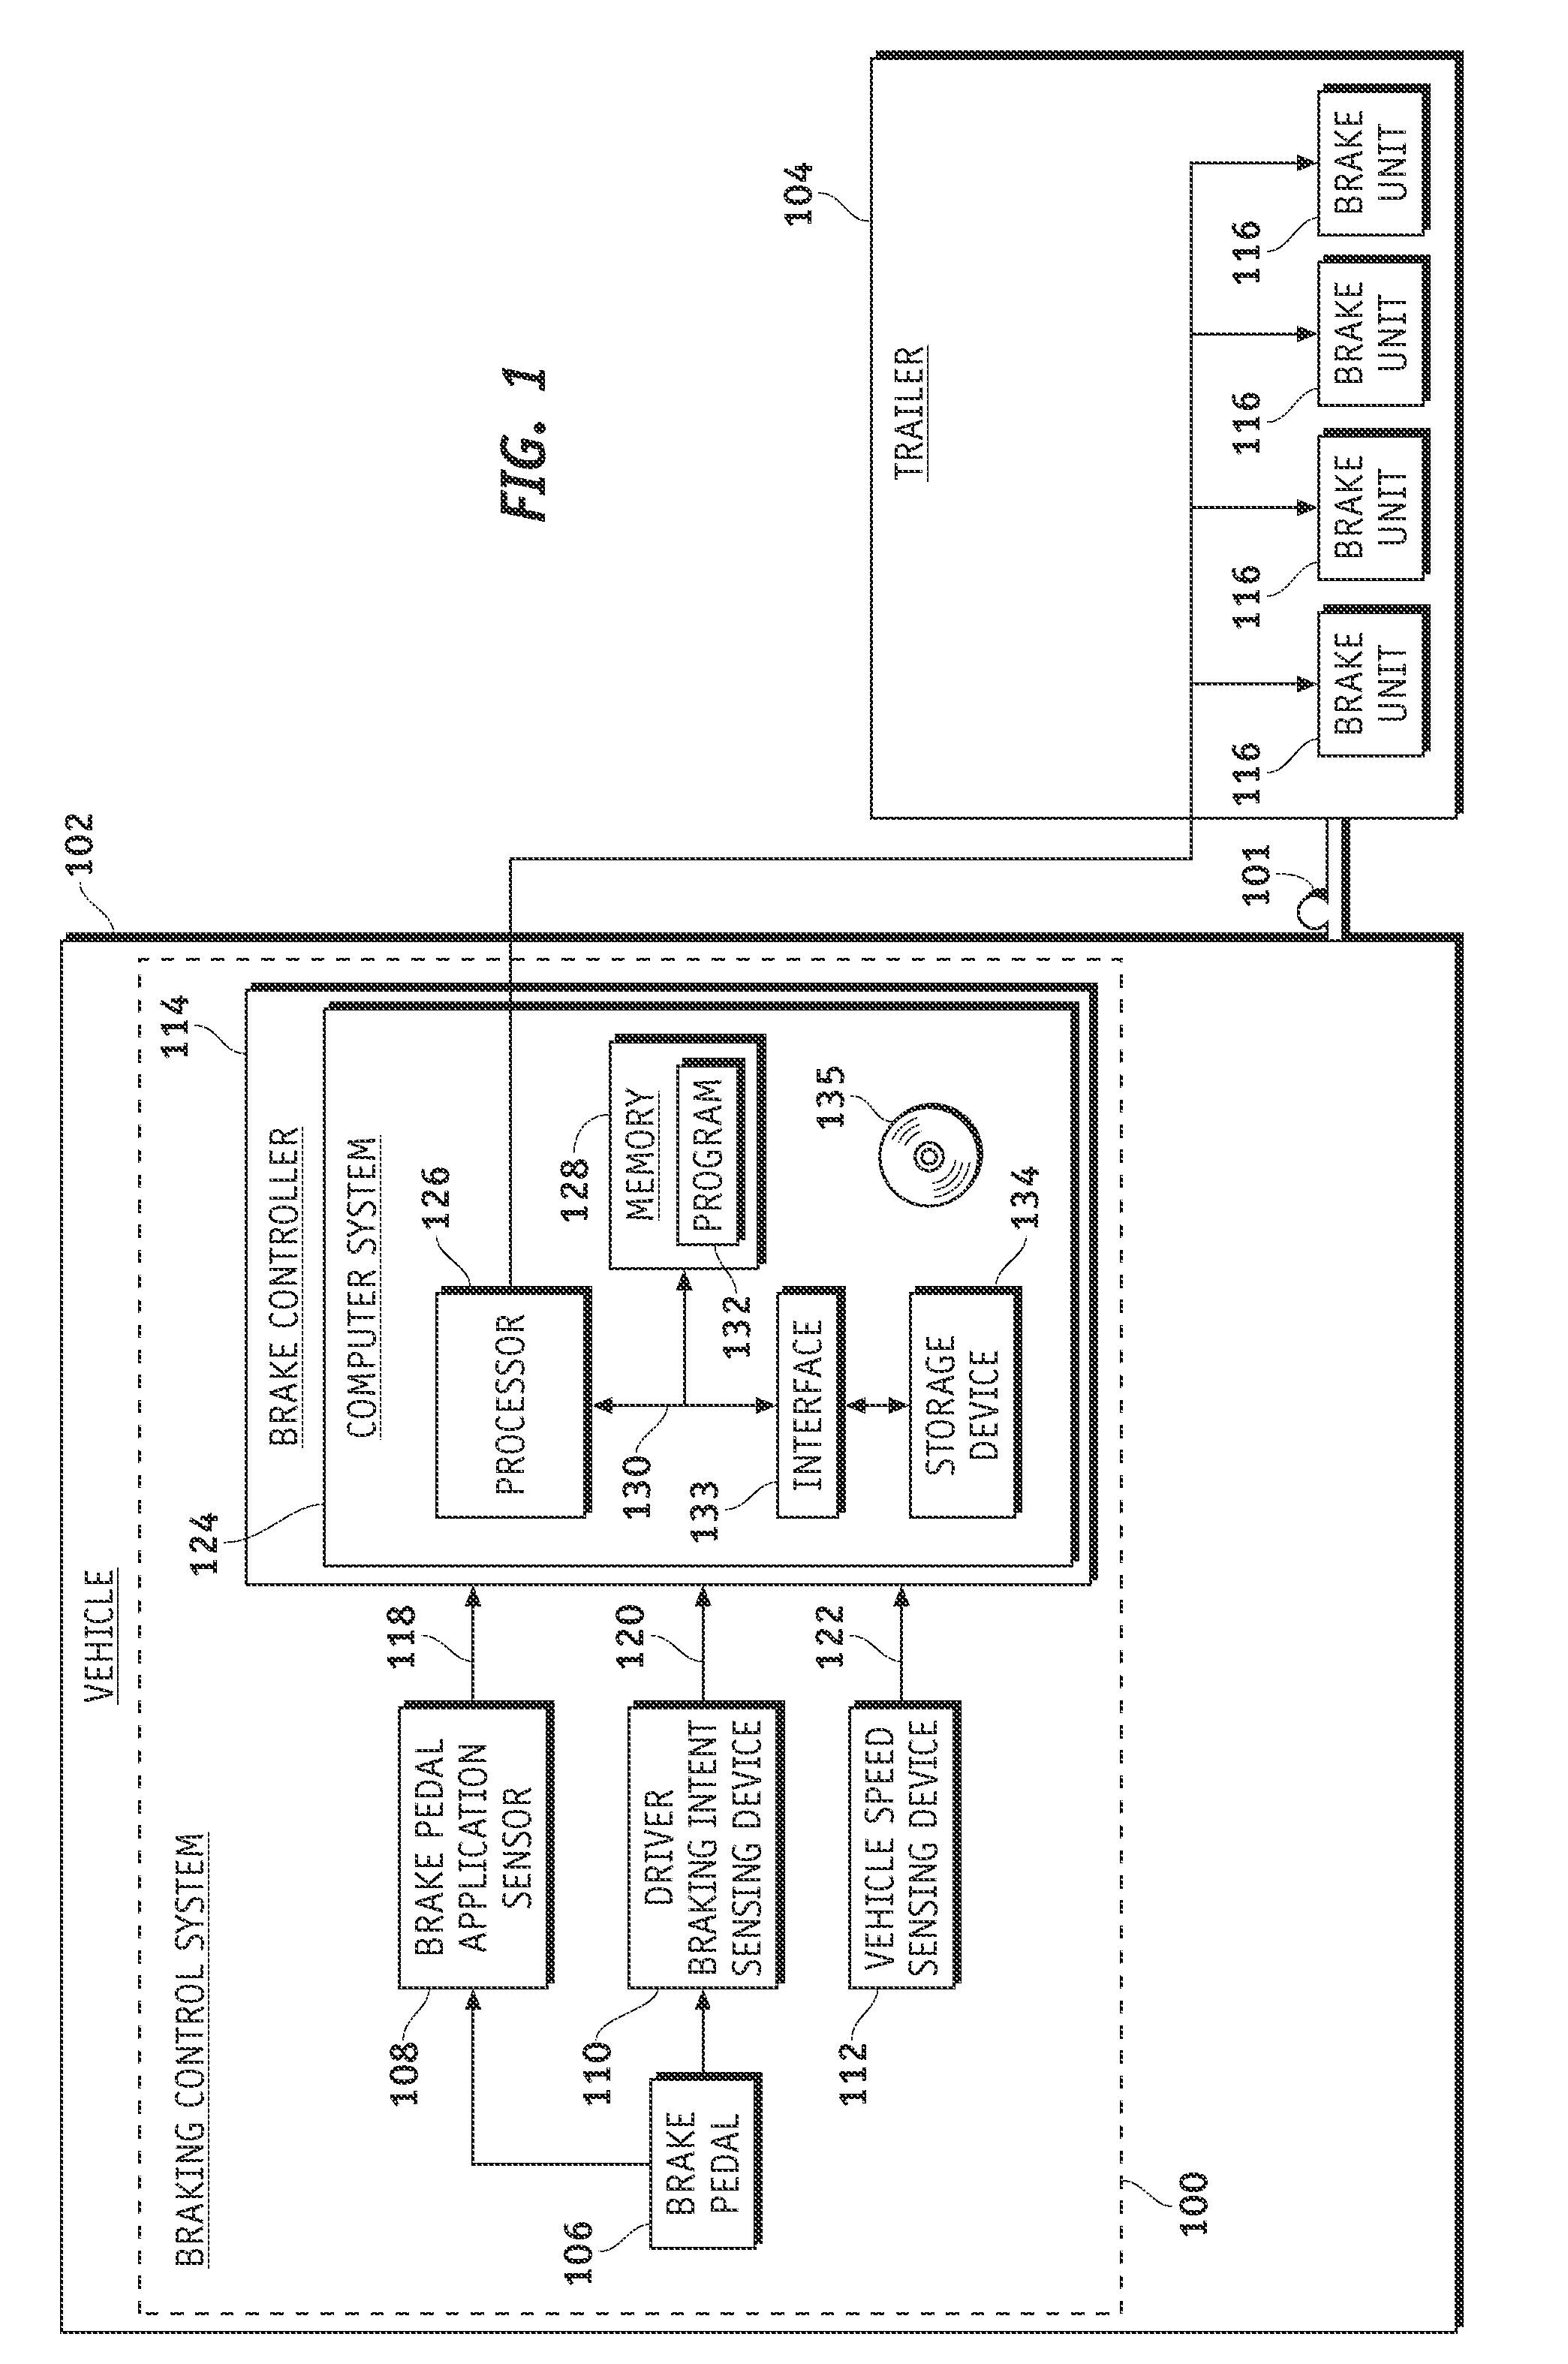 Methods and systems to control braking of a trailer hitched to a vehicle